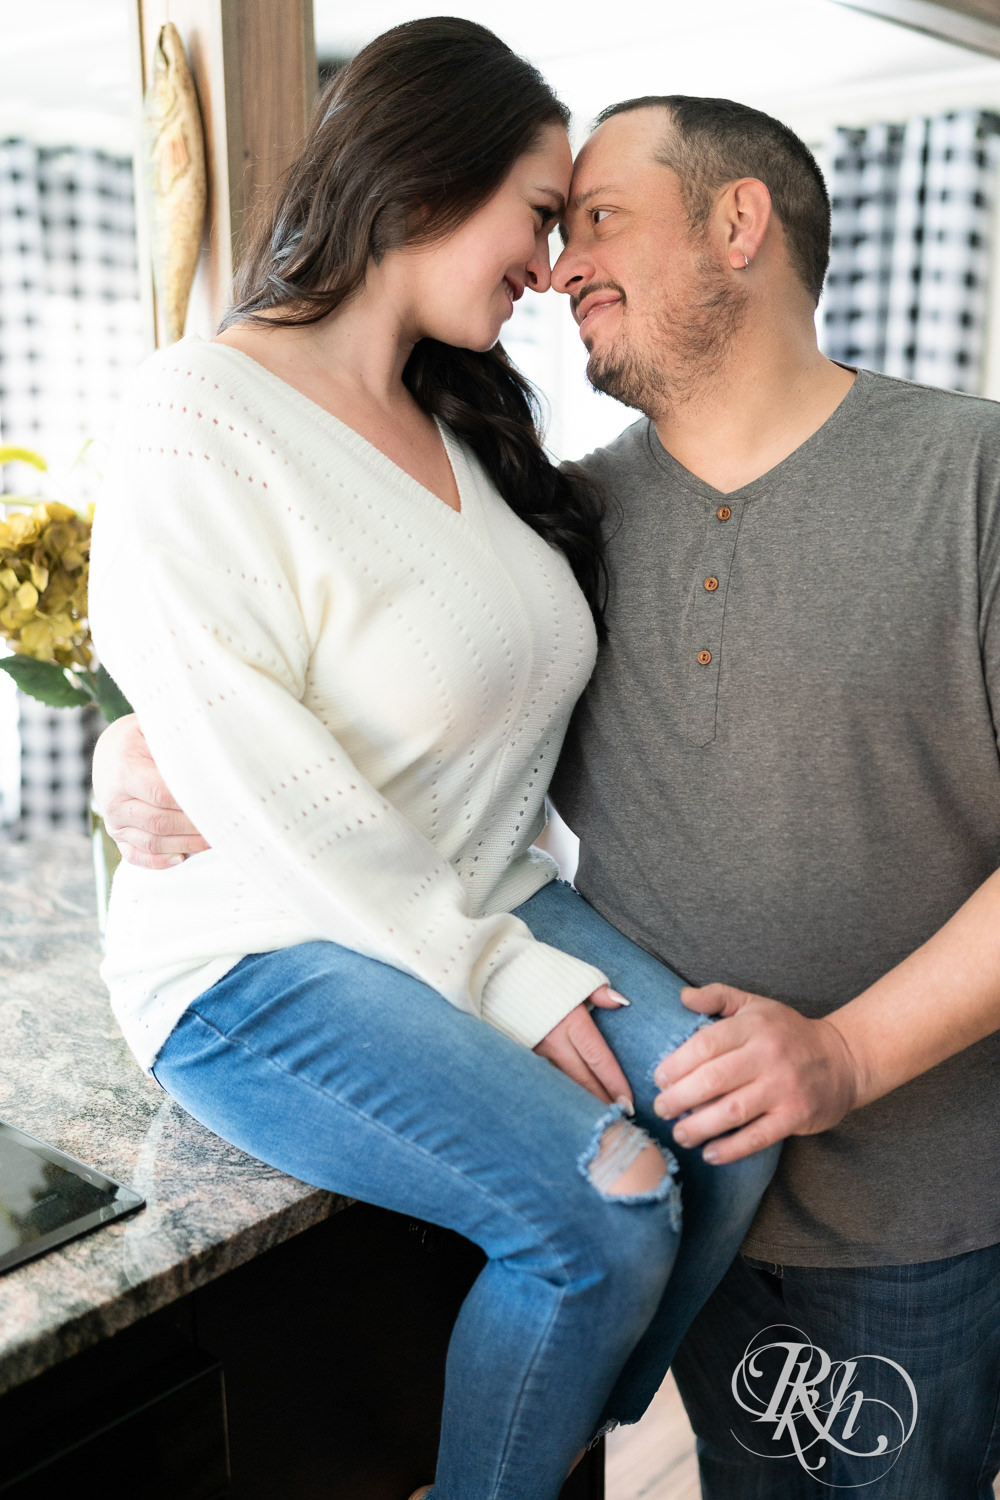 Man and woman in jeans and sweaters smile in a cabin in Pine City, Minnesota during engagement photography.